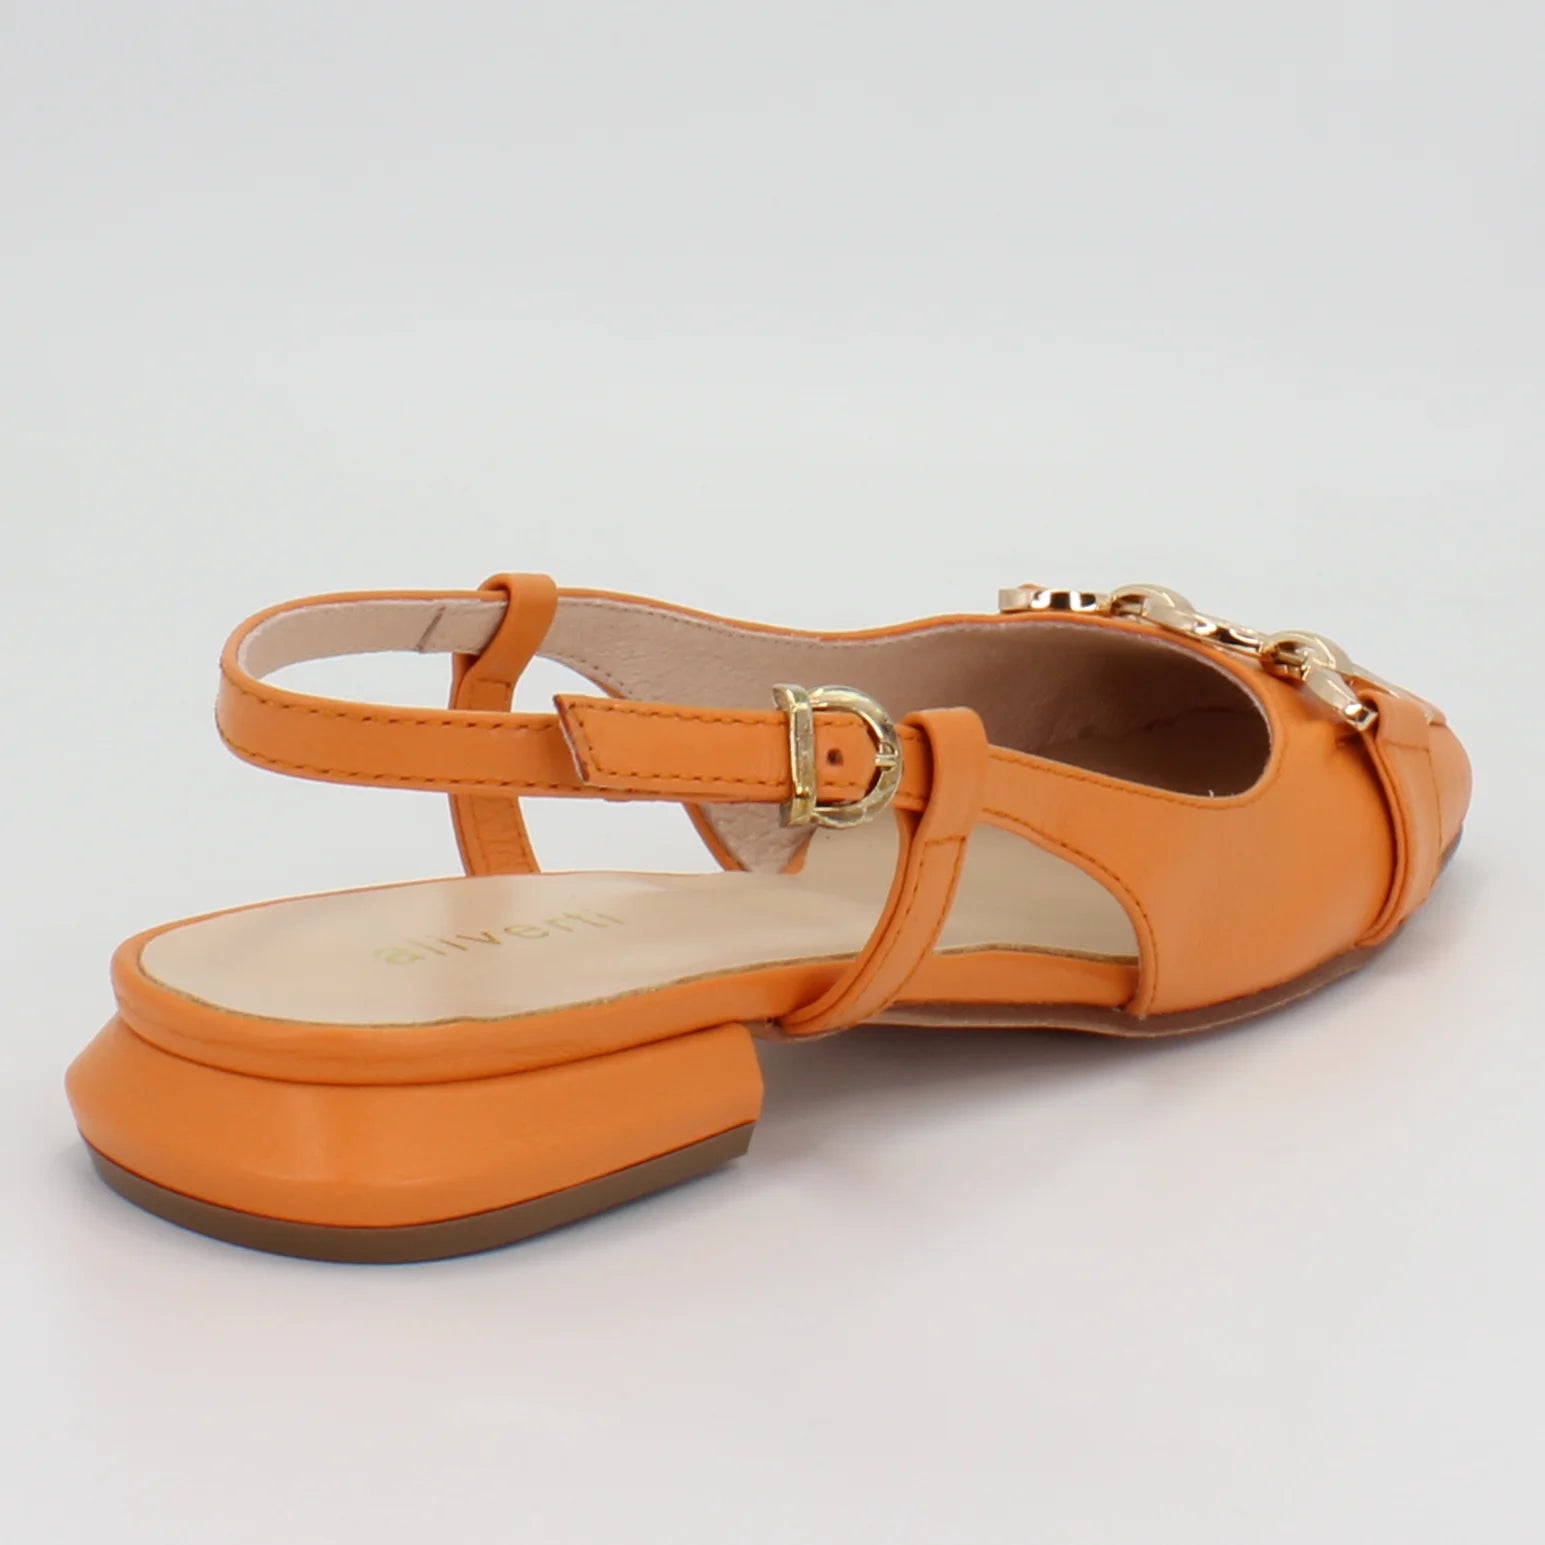 Shop Handmade Italian Leather sling-back moccasin in arancio orange (P255) or browse our range of hand-made Italian shoes in leather or suede in-store at Aliverti Cape Town, or shop online. We deliver in South Africa & offer multiple payment plans as well as accept multiple safe & secure payment methods.